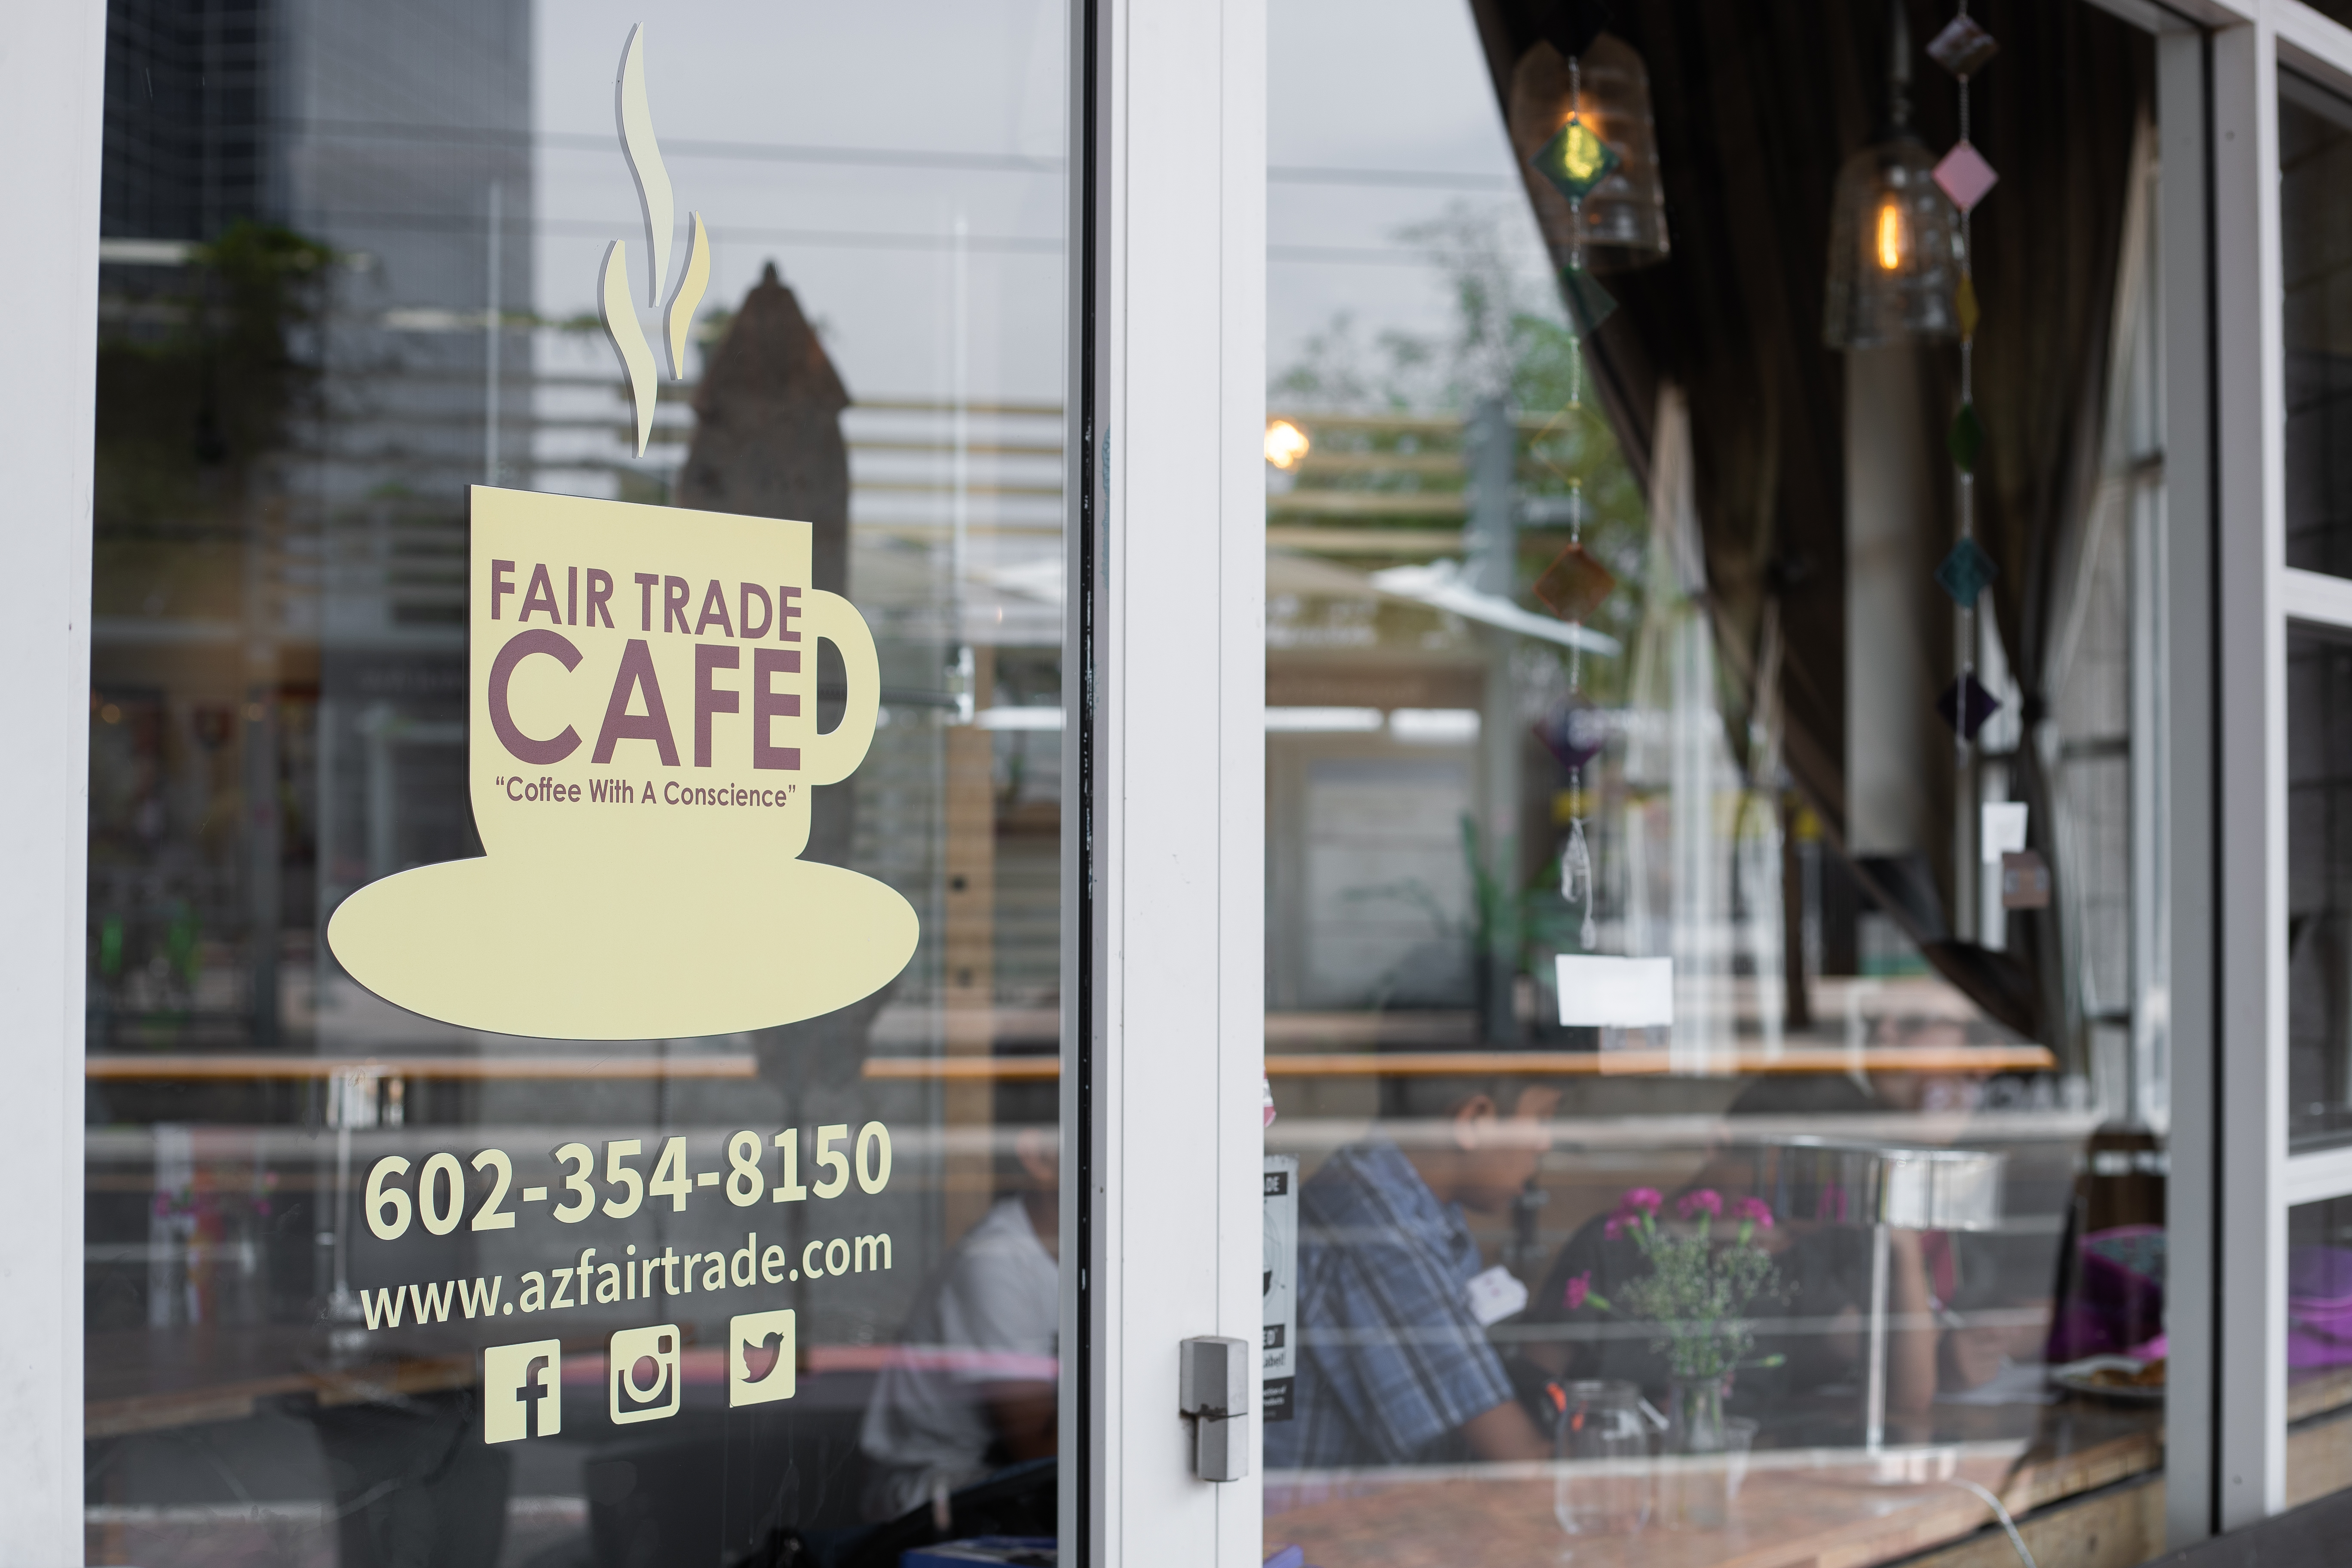 Stephanie Vasquez says it was a difficult decision to close the Fair Trade Cafe in downtown Phoenix. She believes it is the socially responsible thing to do.